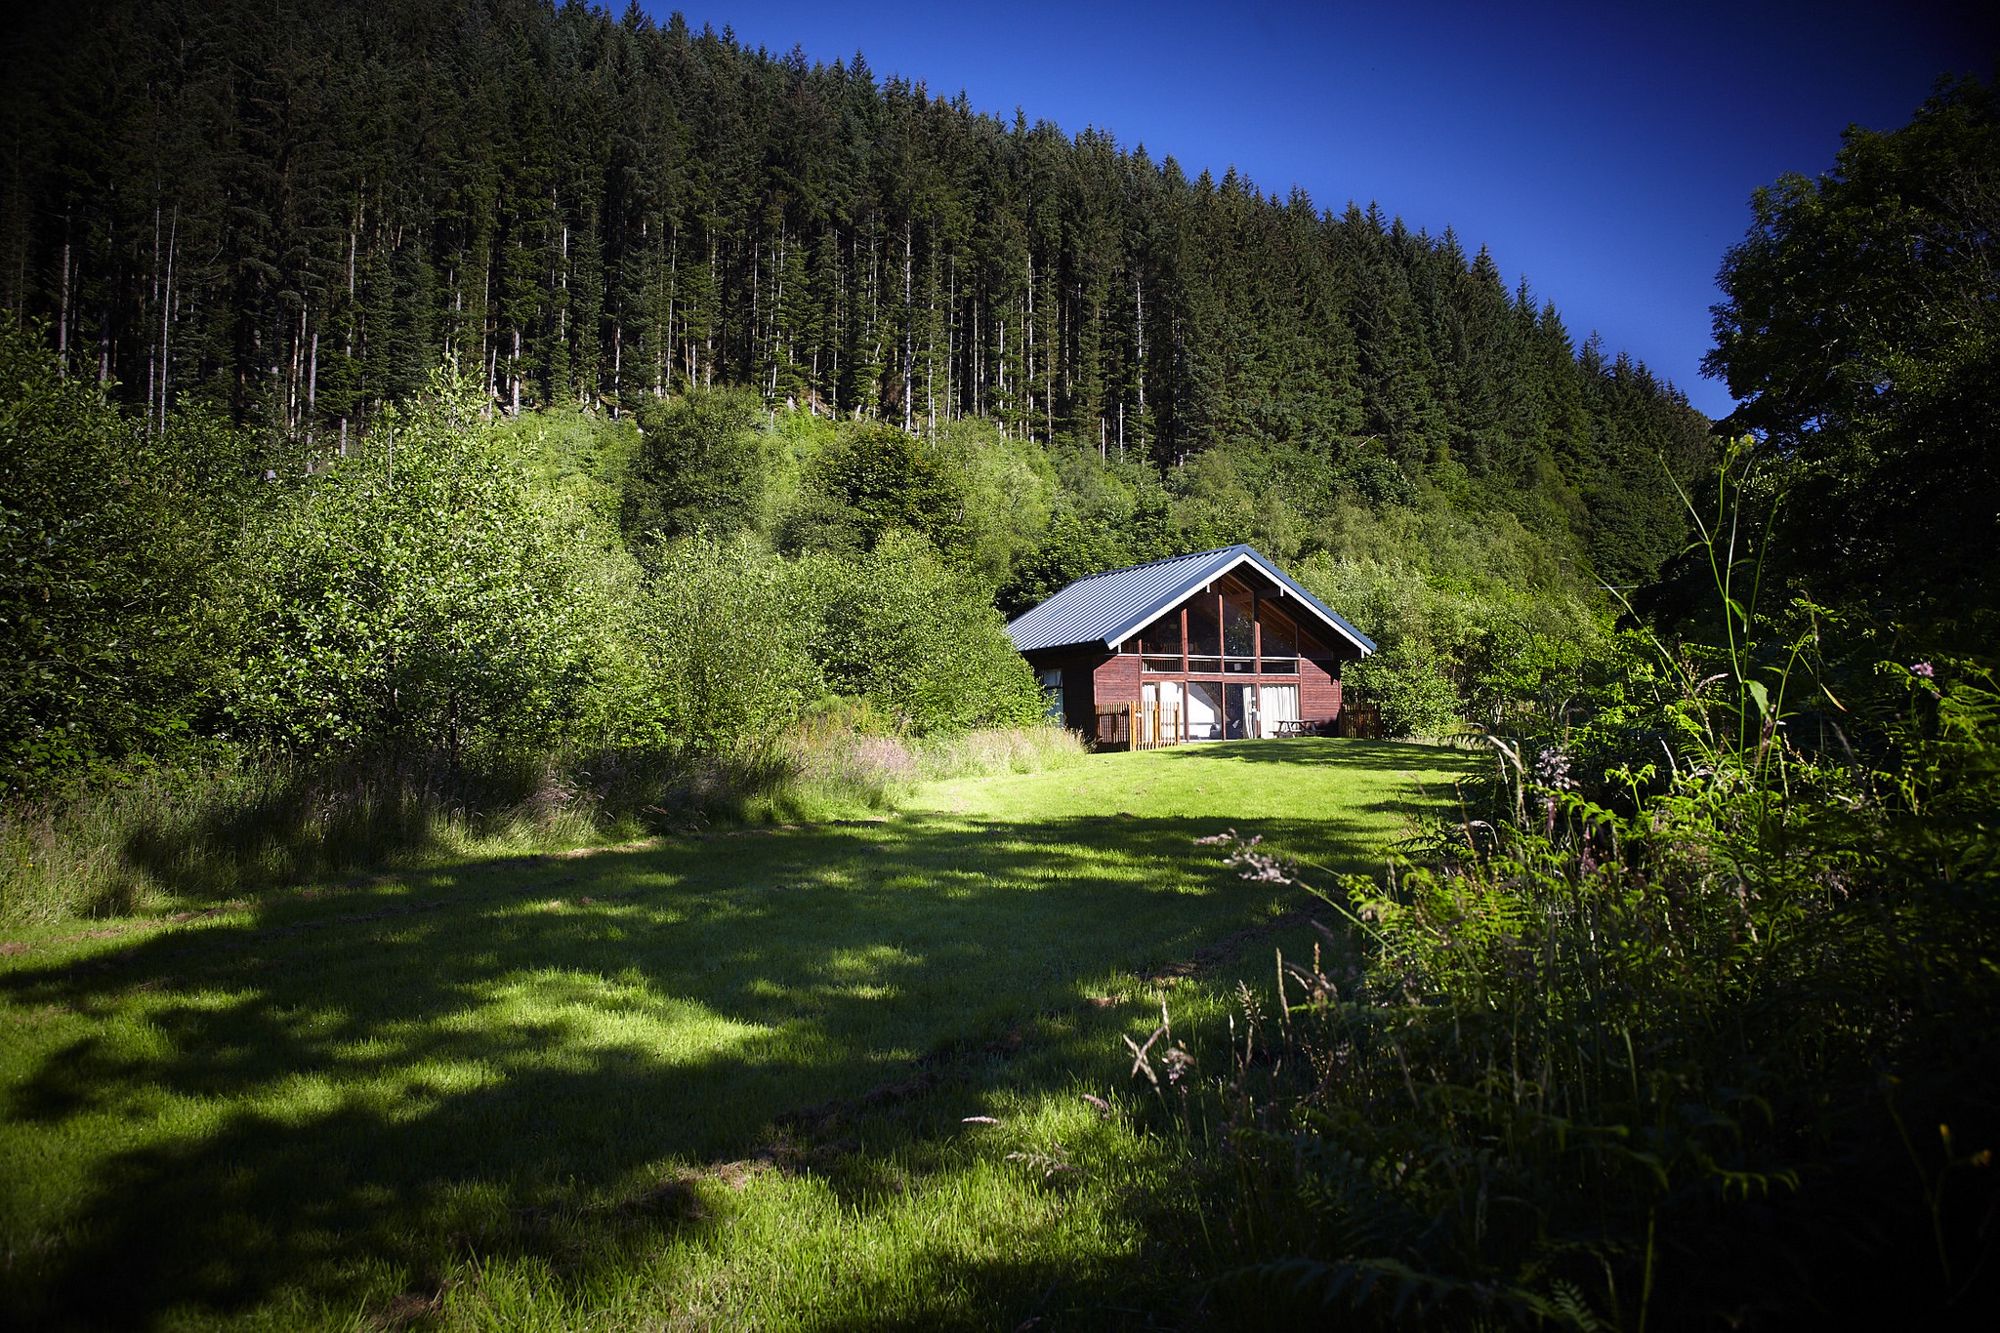 Hotels, Cottages, B&Bs & Glamping in Central Scotland